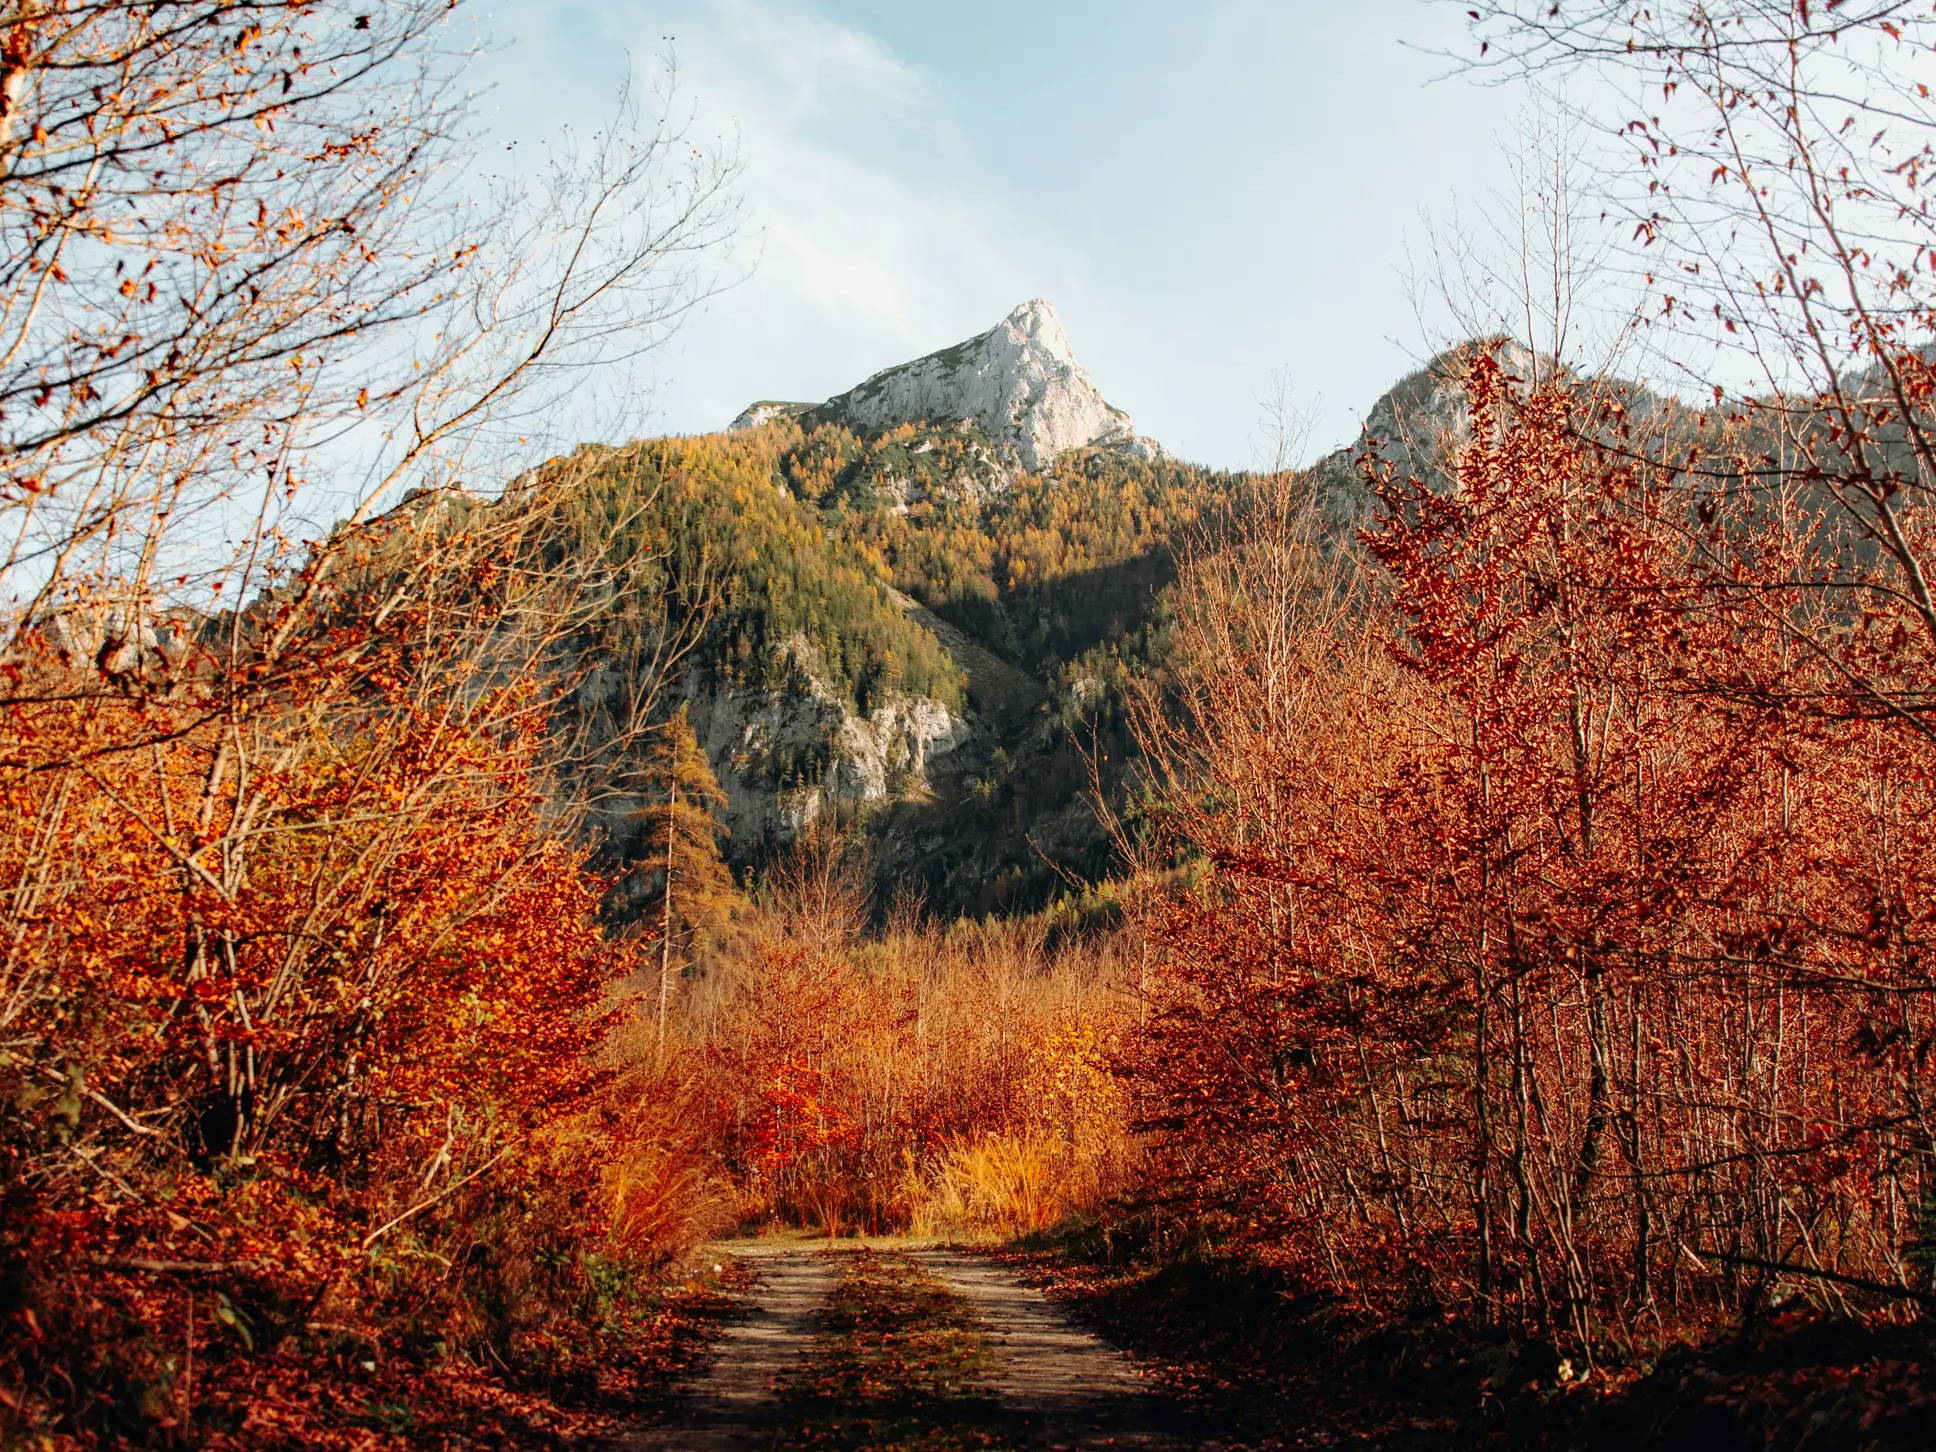 A path lined with autumn trees leading to a mountain